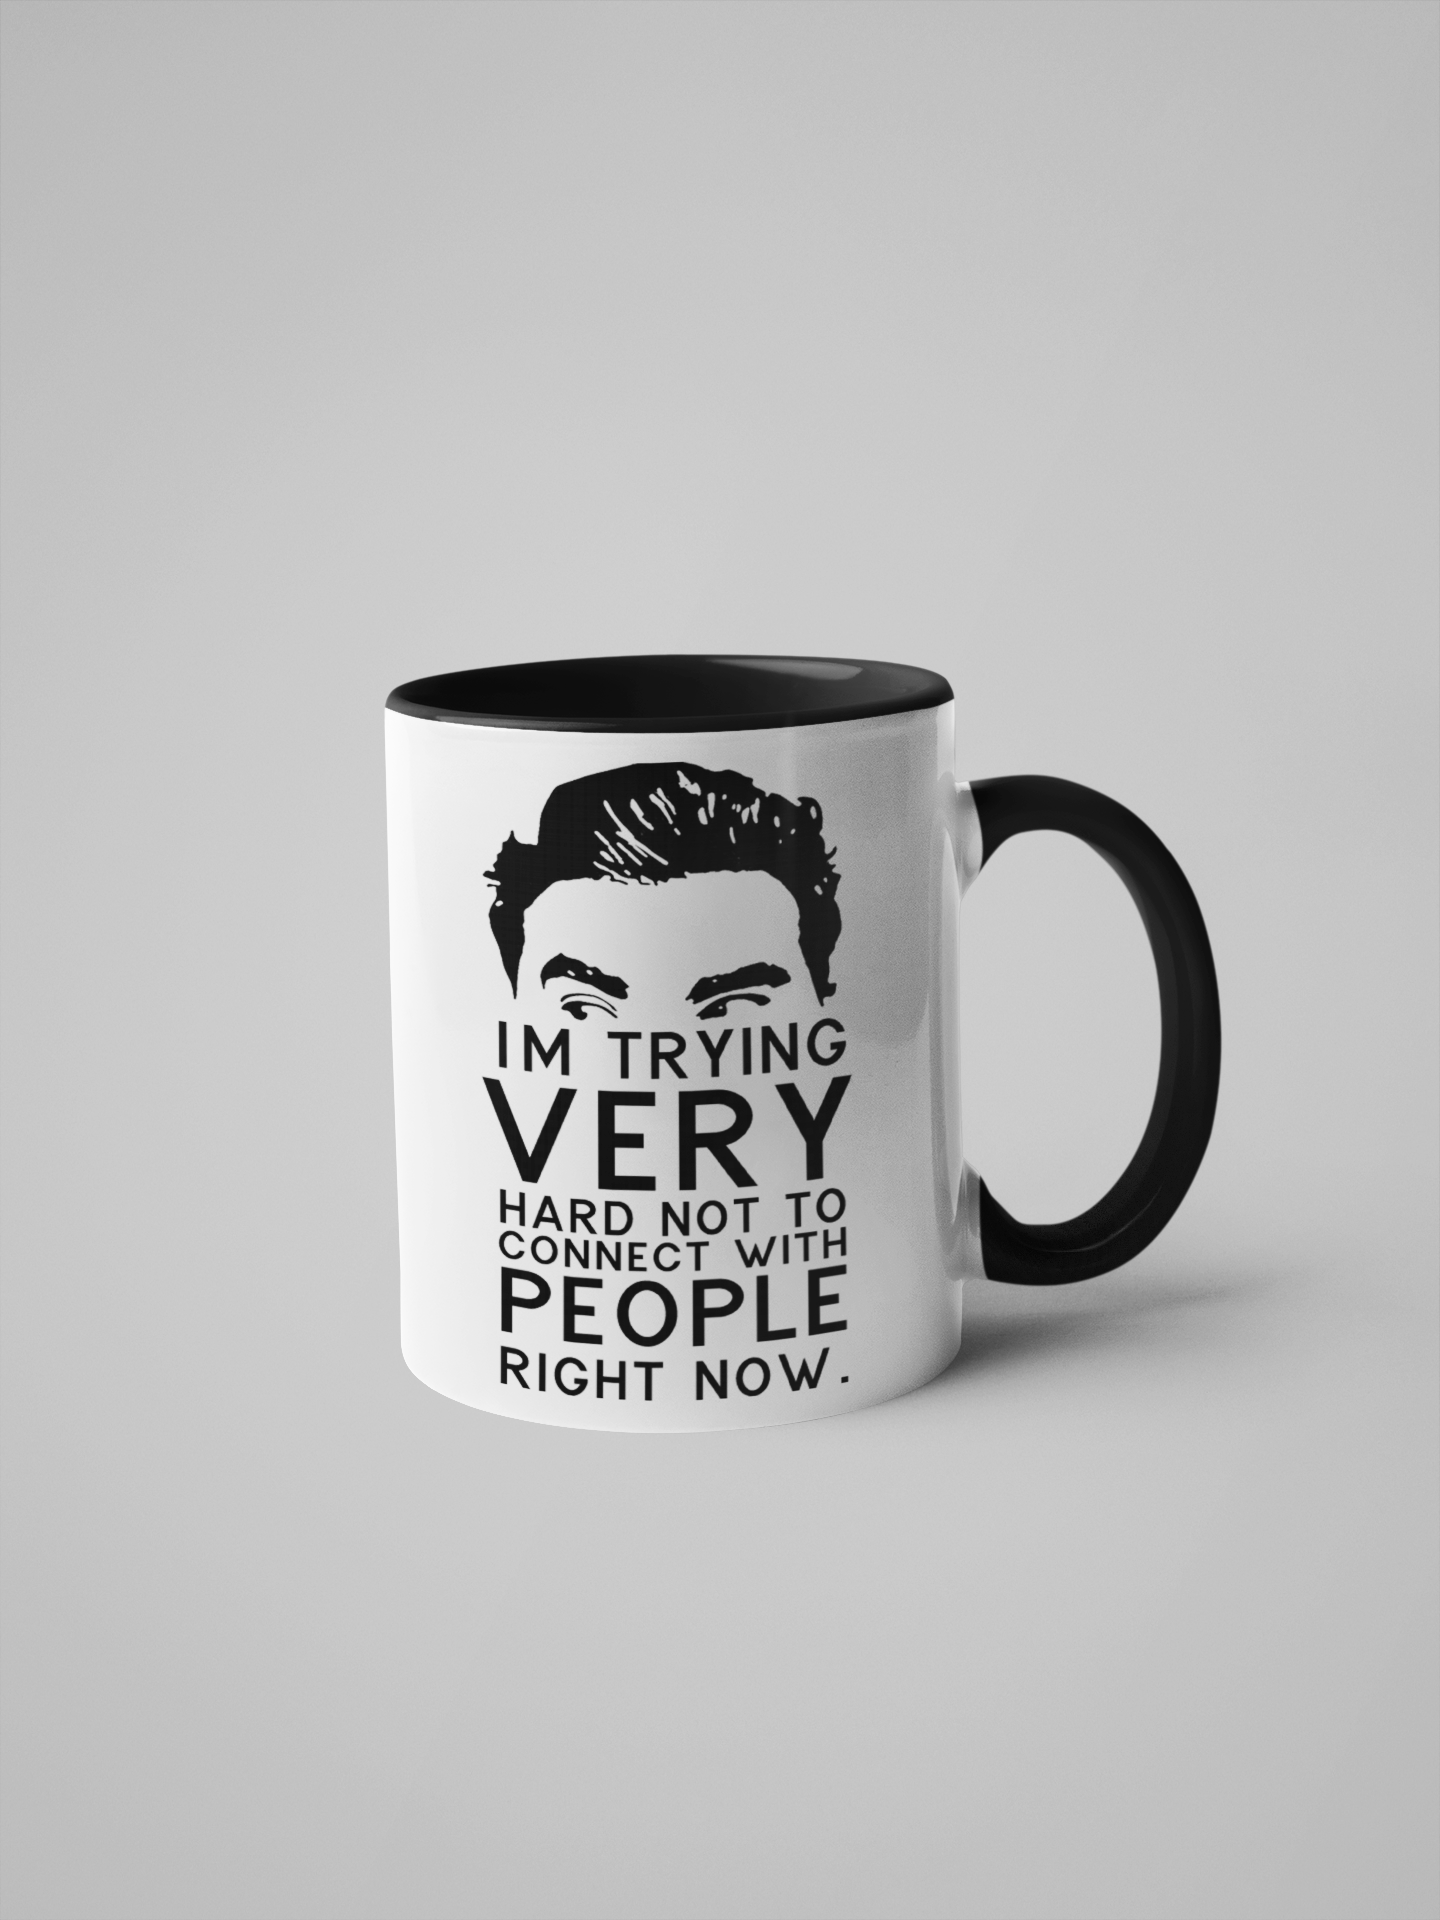 I'm Trying Very Hard Not to Connect with People Schitt's Creek Mug - Black and White